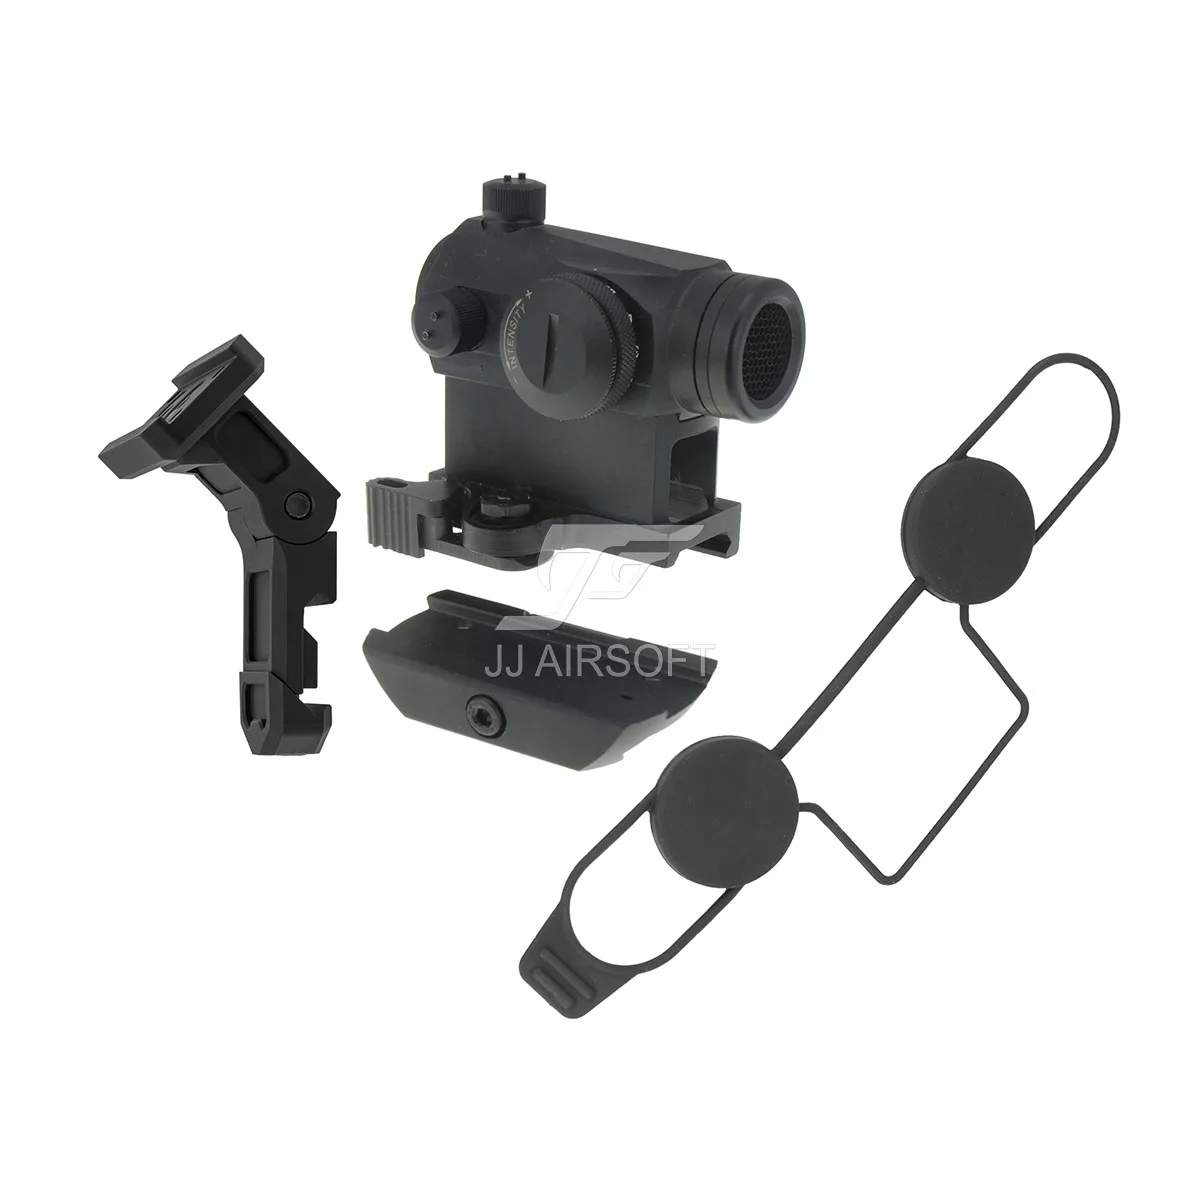 JJ Airsoft 1x24 Red Dot with Killflash / Kill Flash , Adjustable Angle Offset  Mount, QD Riser Mount and Low Mount (Black/Tan)